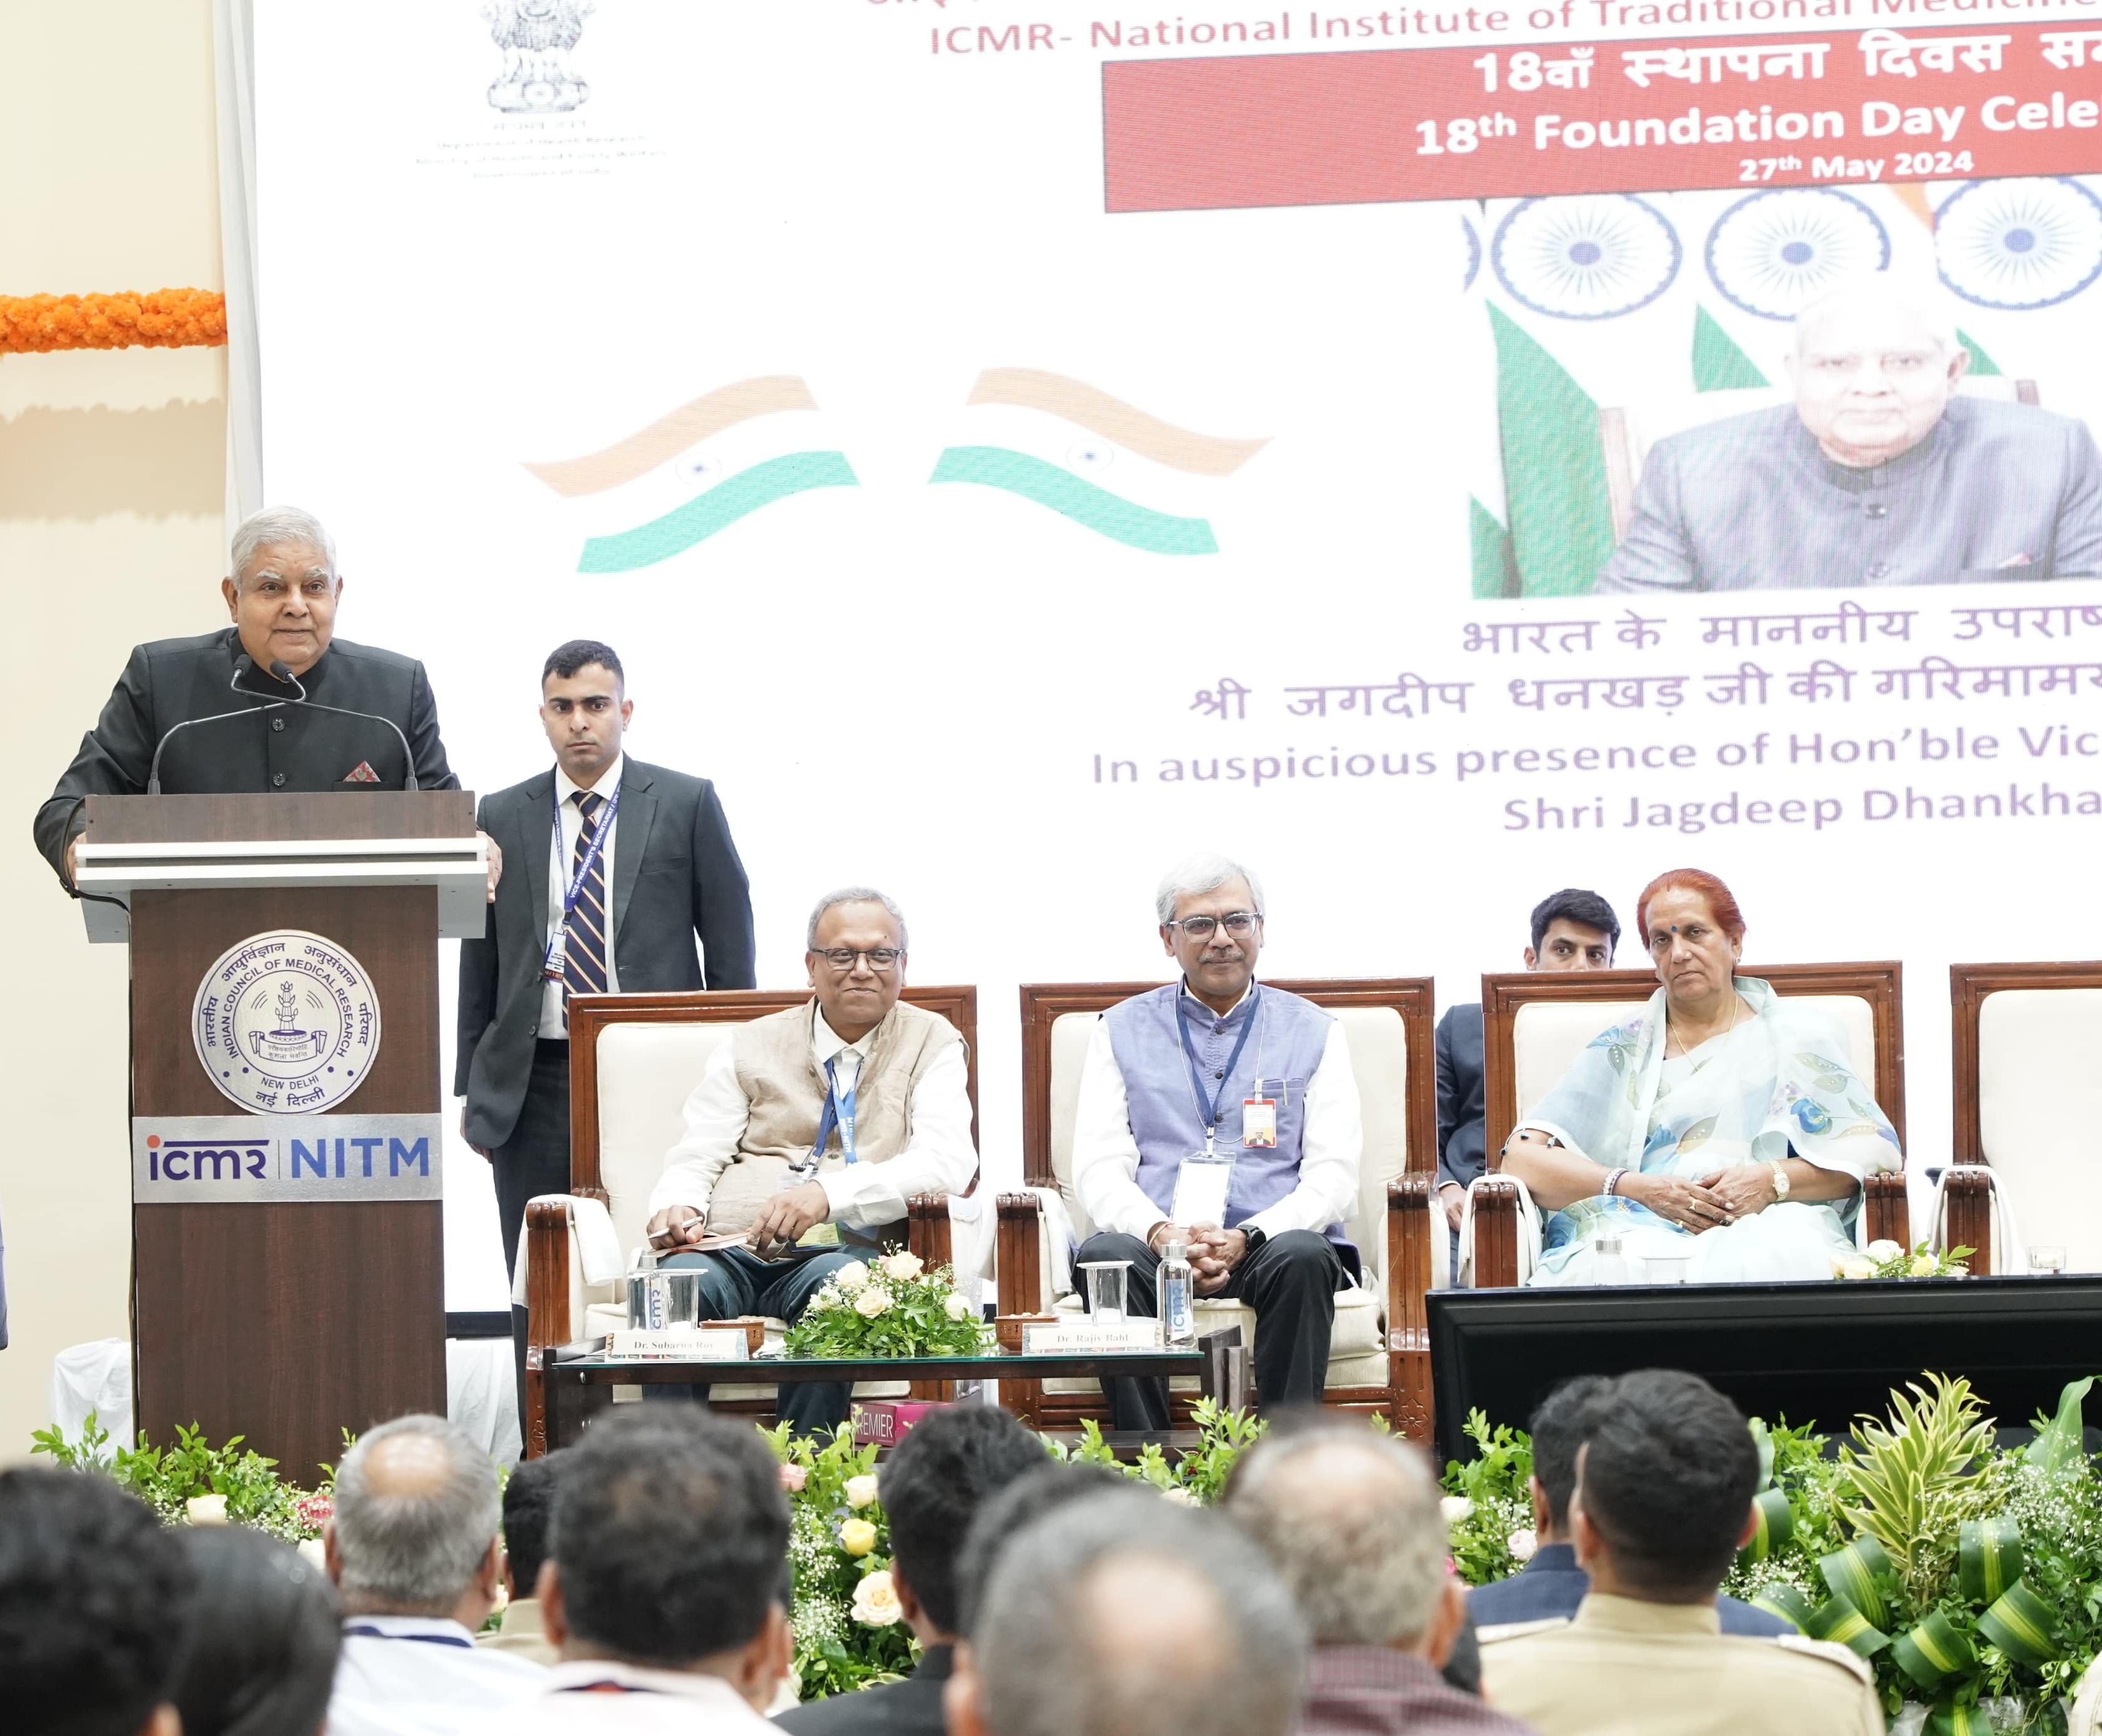 The Vice-President, Shri Jagdeep Dhankhar addressing the 18th Foundation Day celebrations of Indian Council of Medical Research- National Institute of Traditional Medicine (ICMR-NITM) in Belagavi, Karnataka on May 27, 2024.